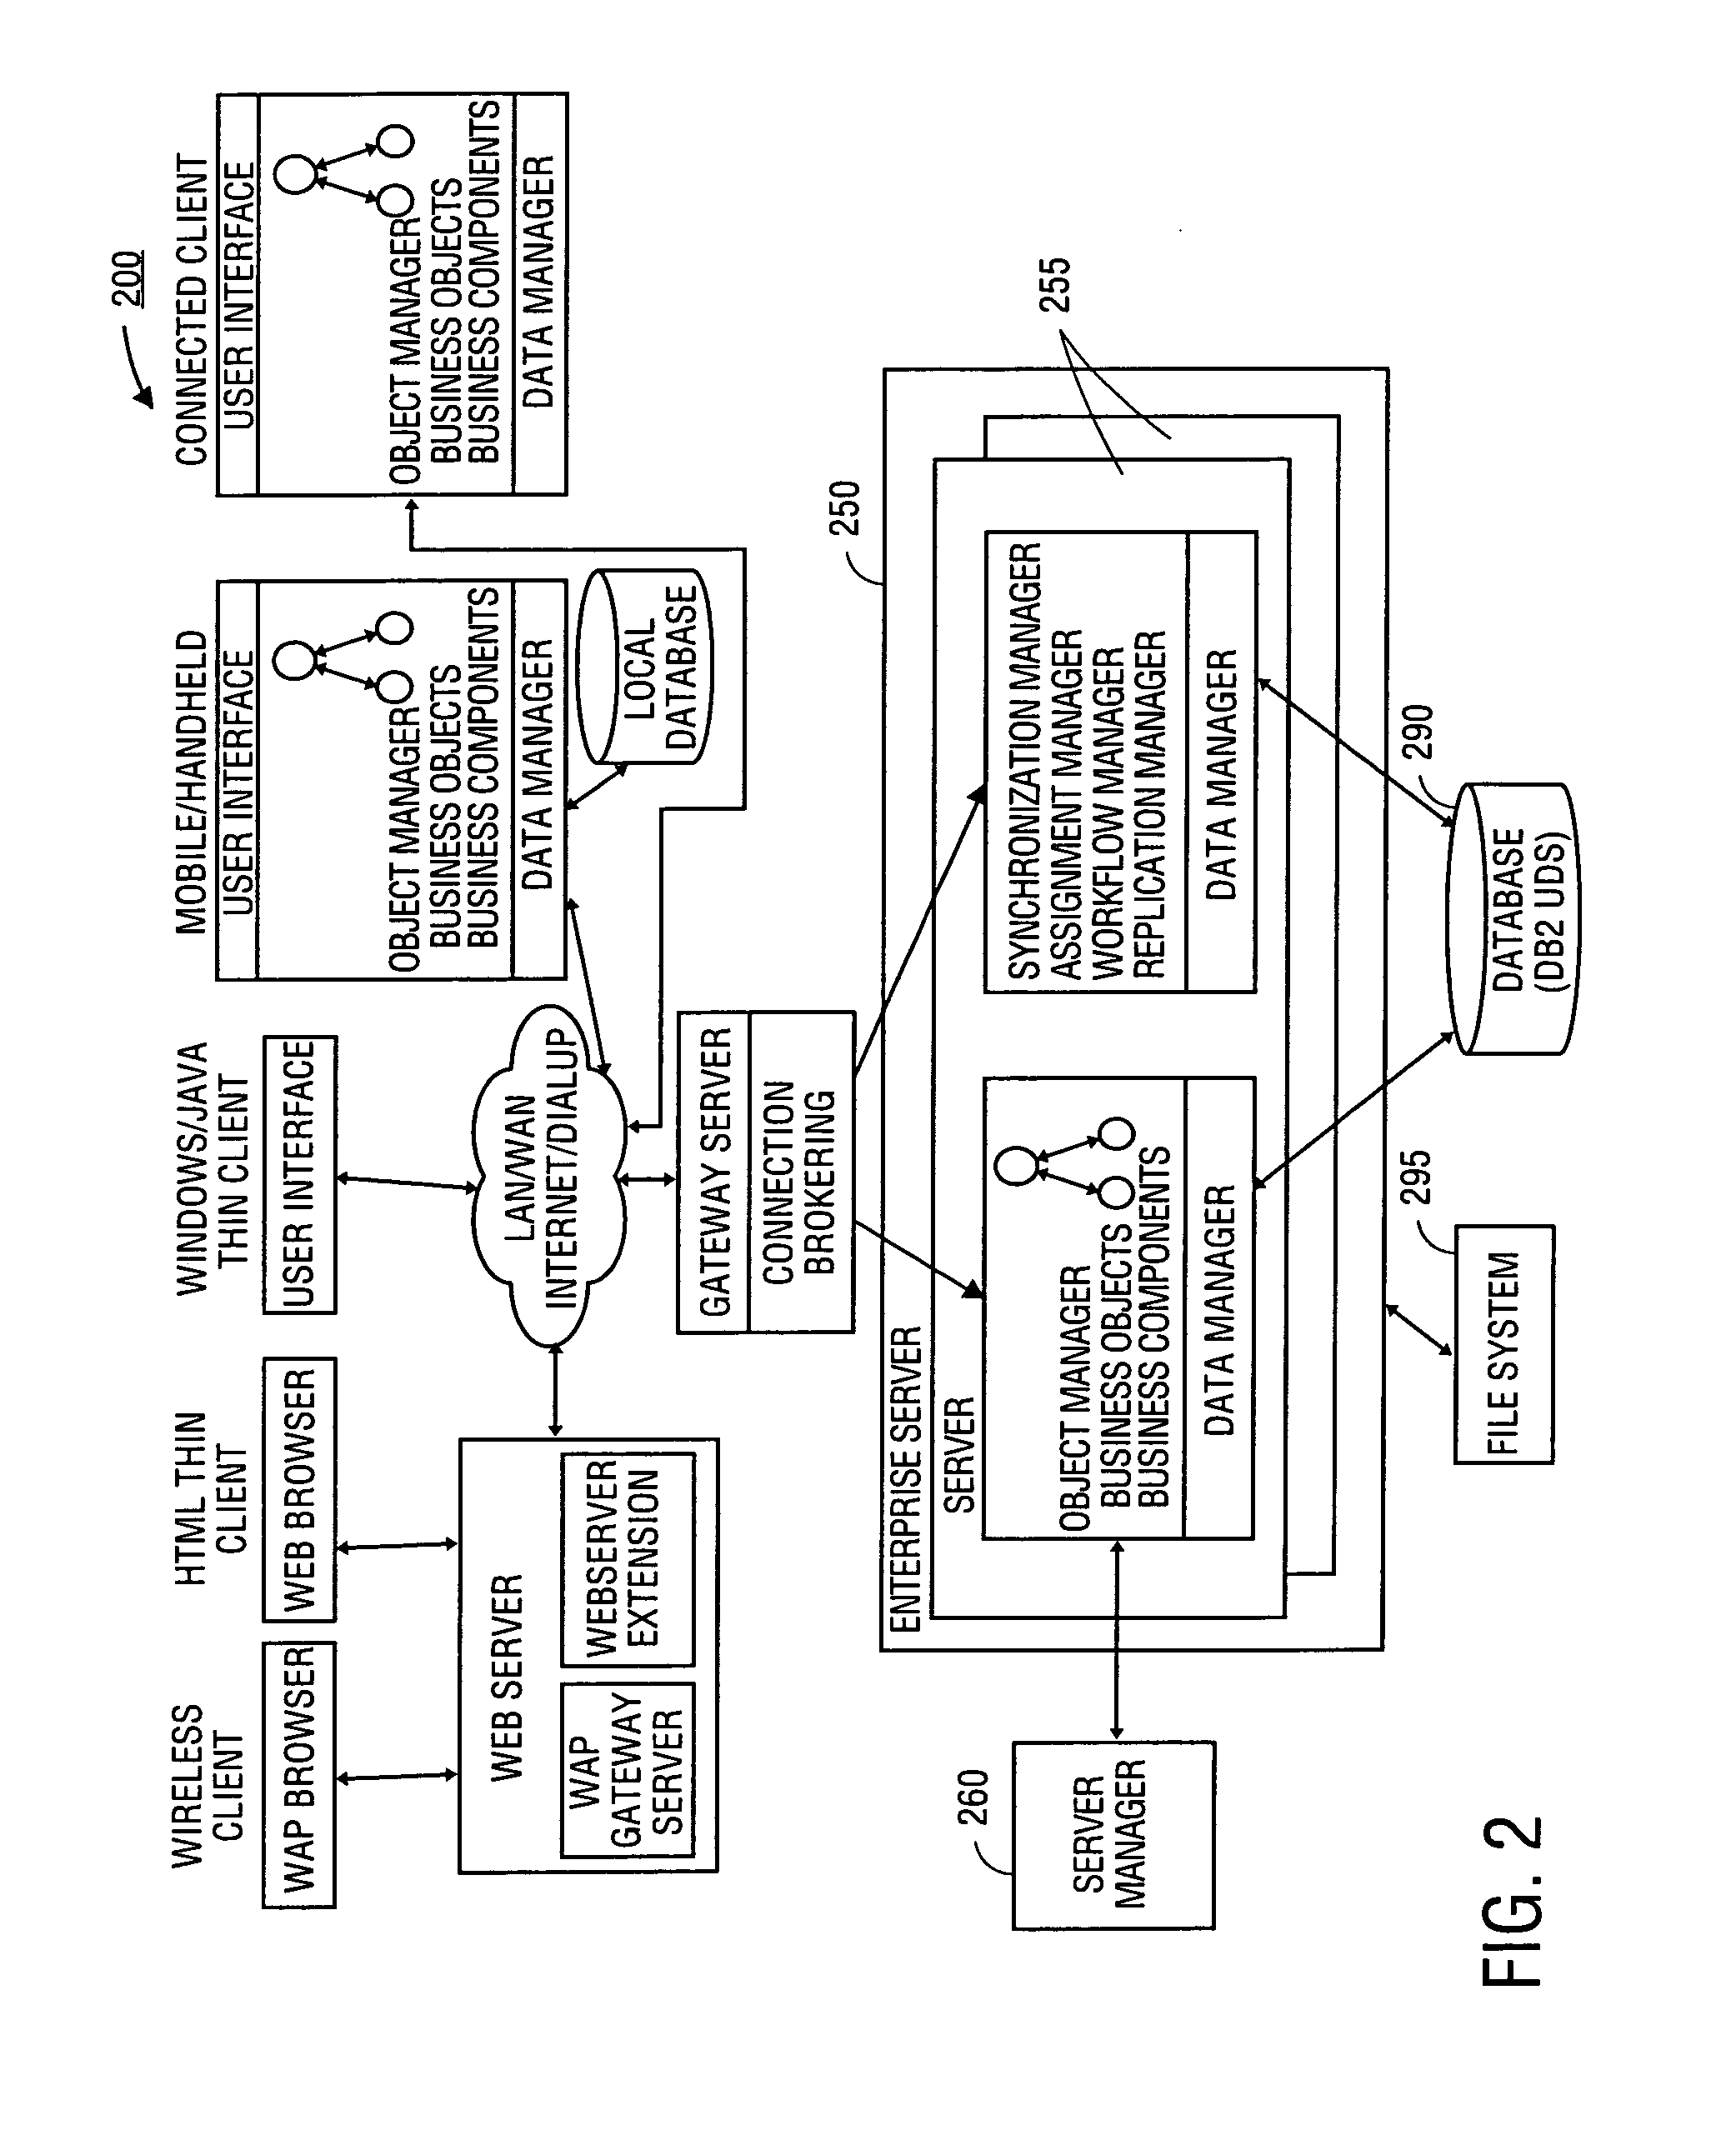 Method, apparatus, and system for remote client search indexing